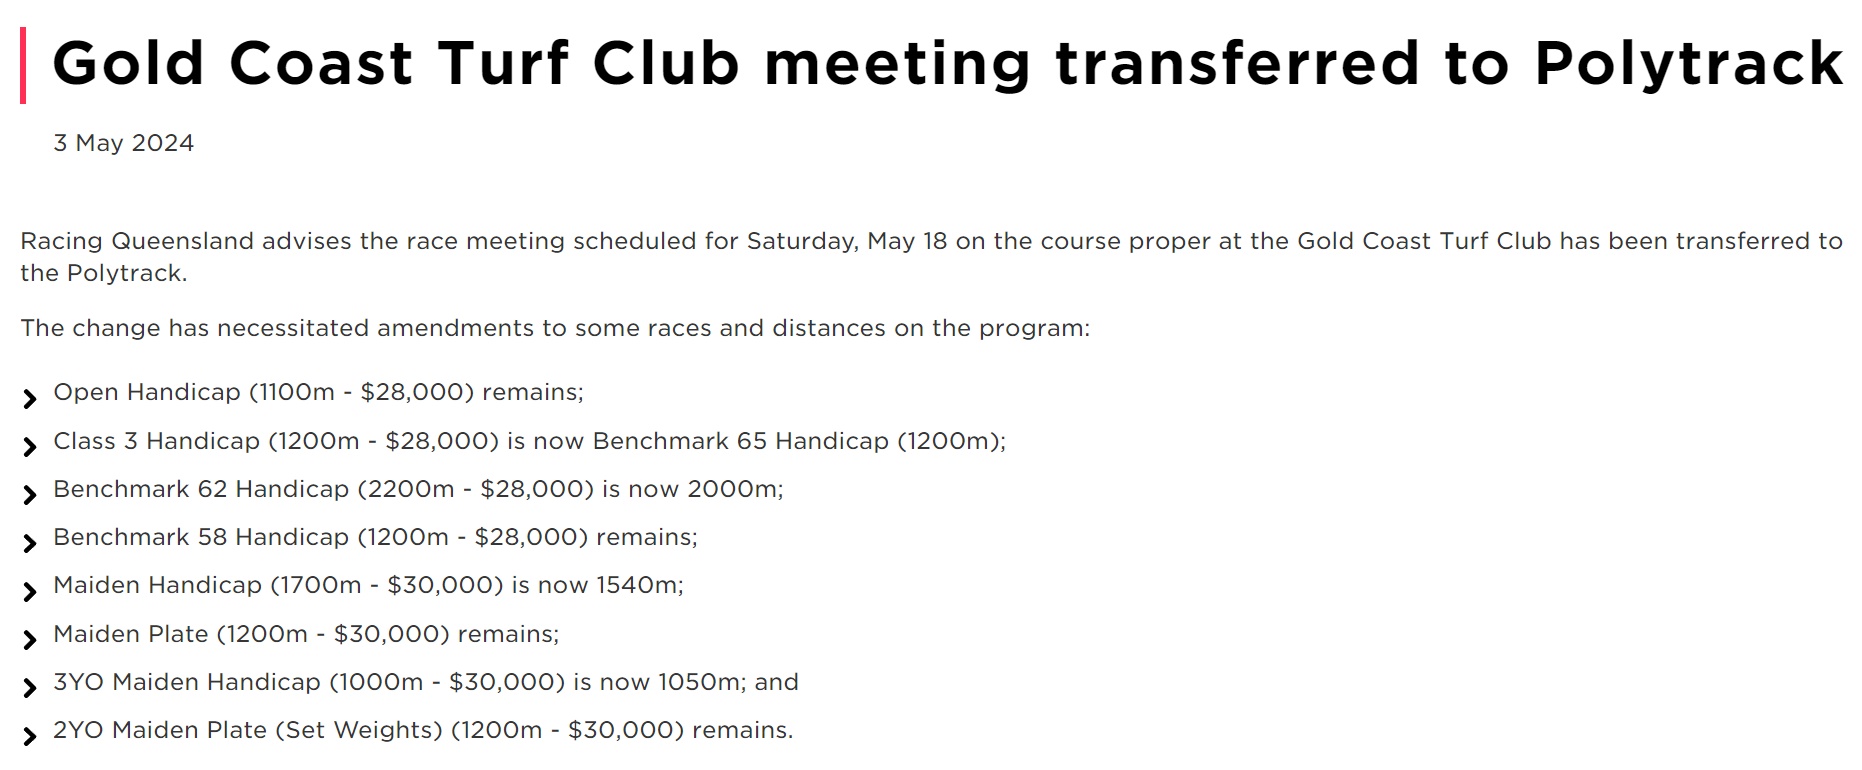 And Then There Was One – The Last Gold Coast Turf Meeting Left Before the Million Dollar Night Card Bumped to the Poly